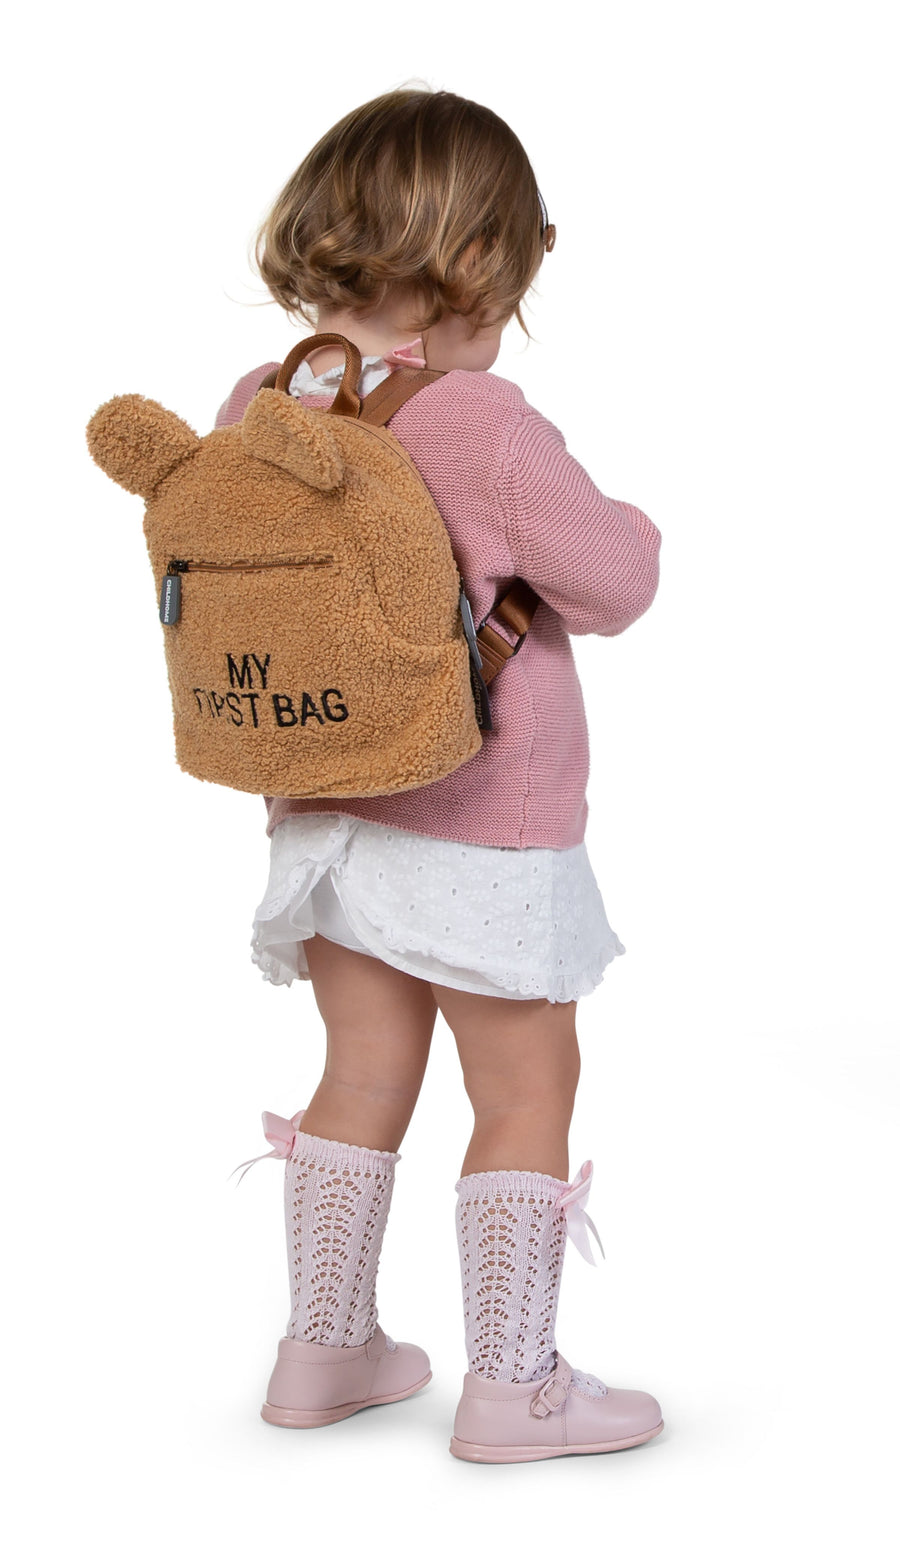 Childhome Kids My First Bag - Teddy Brown